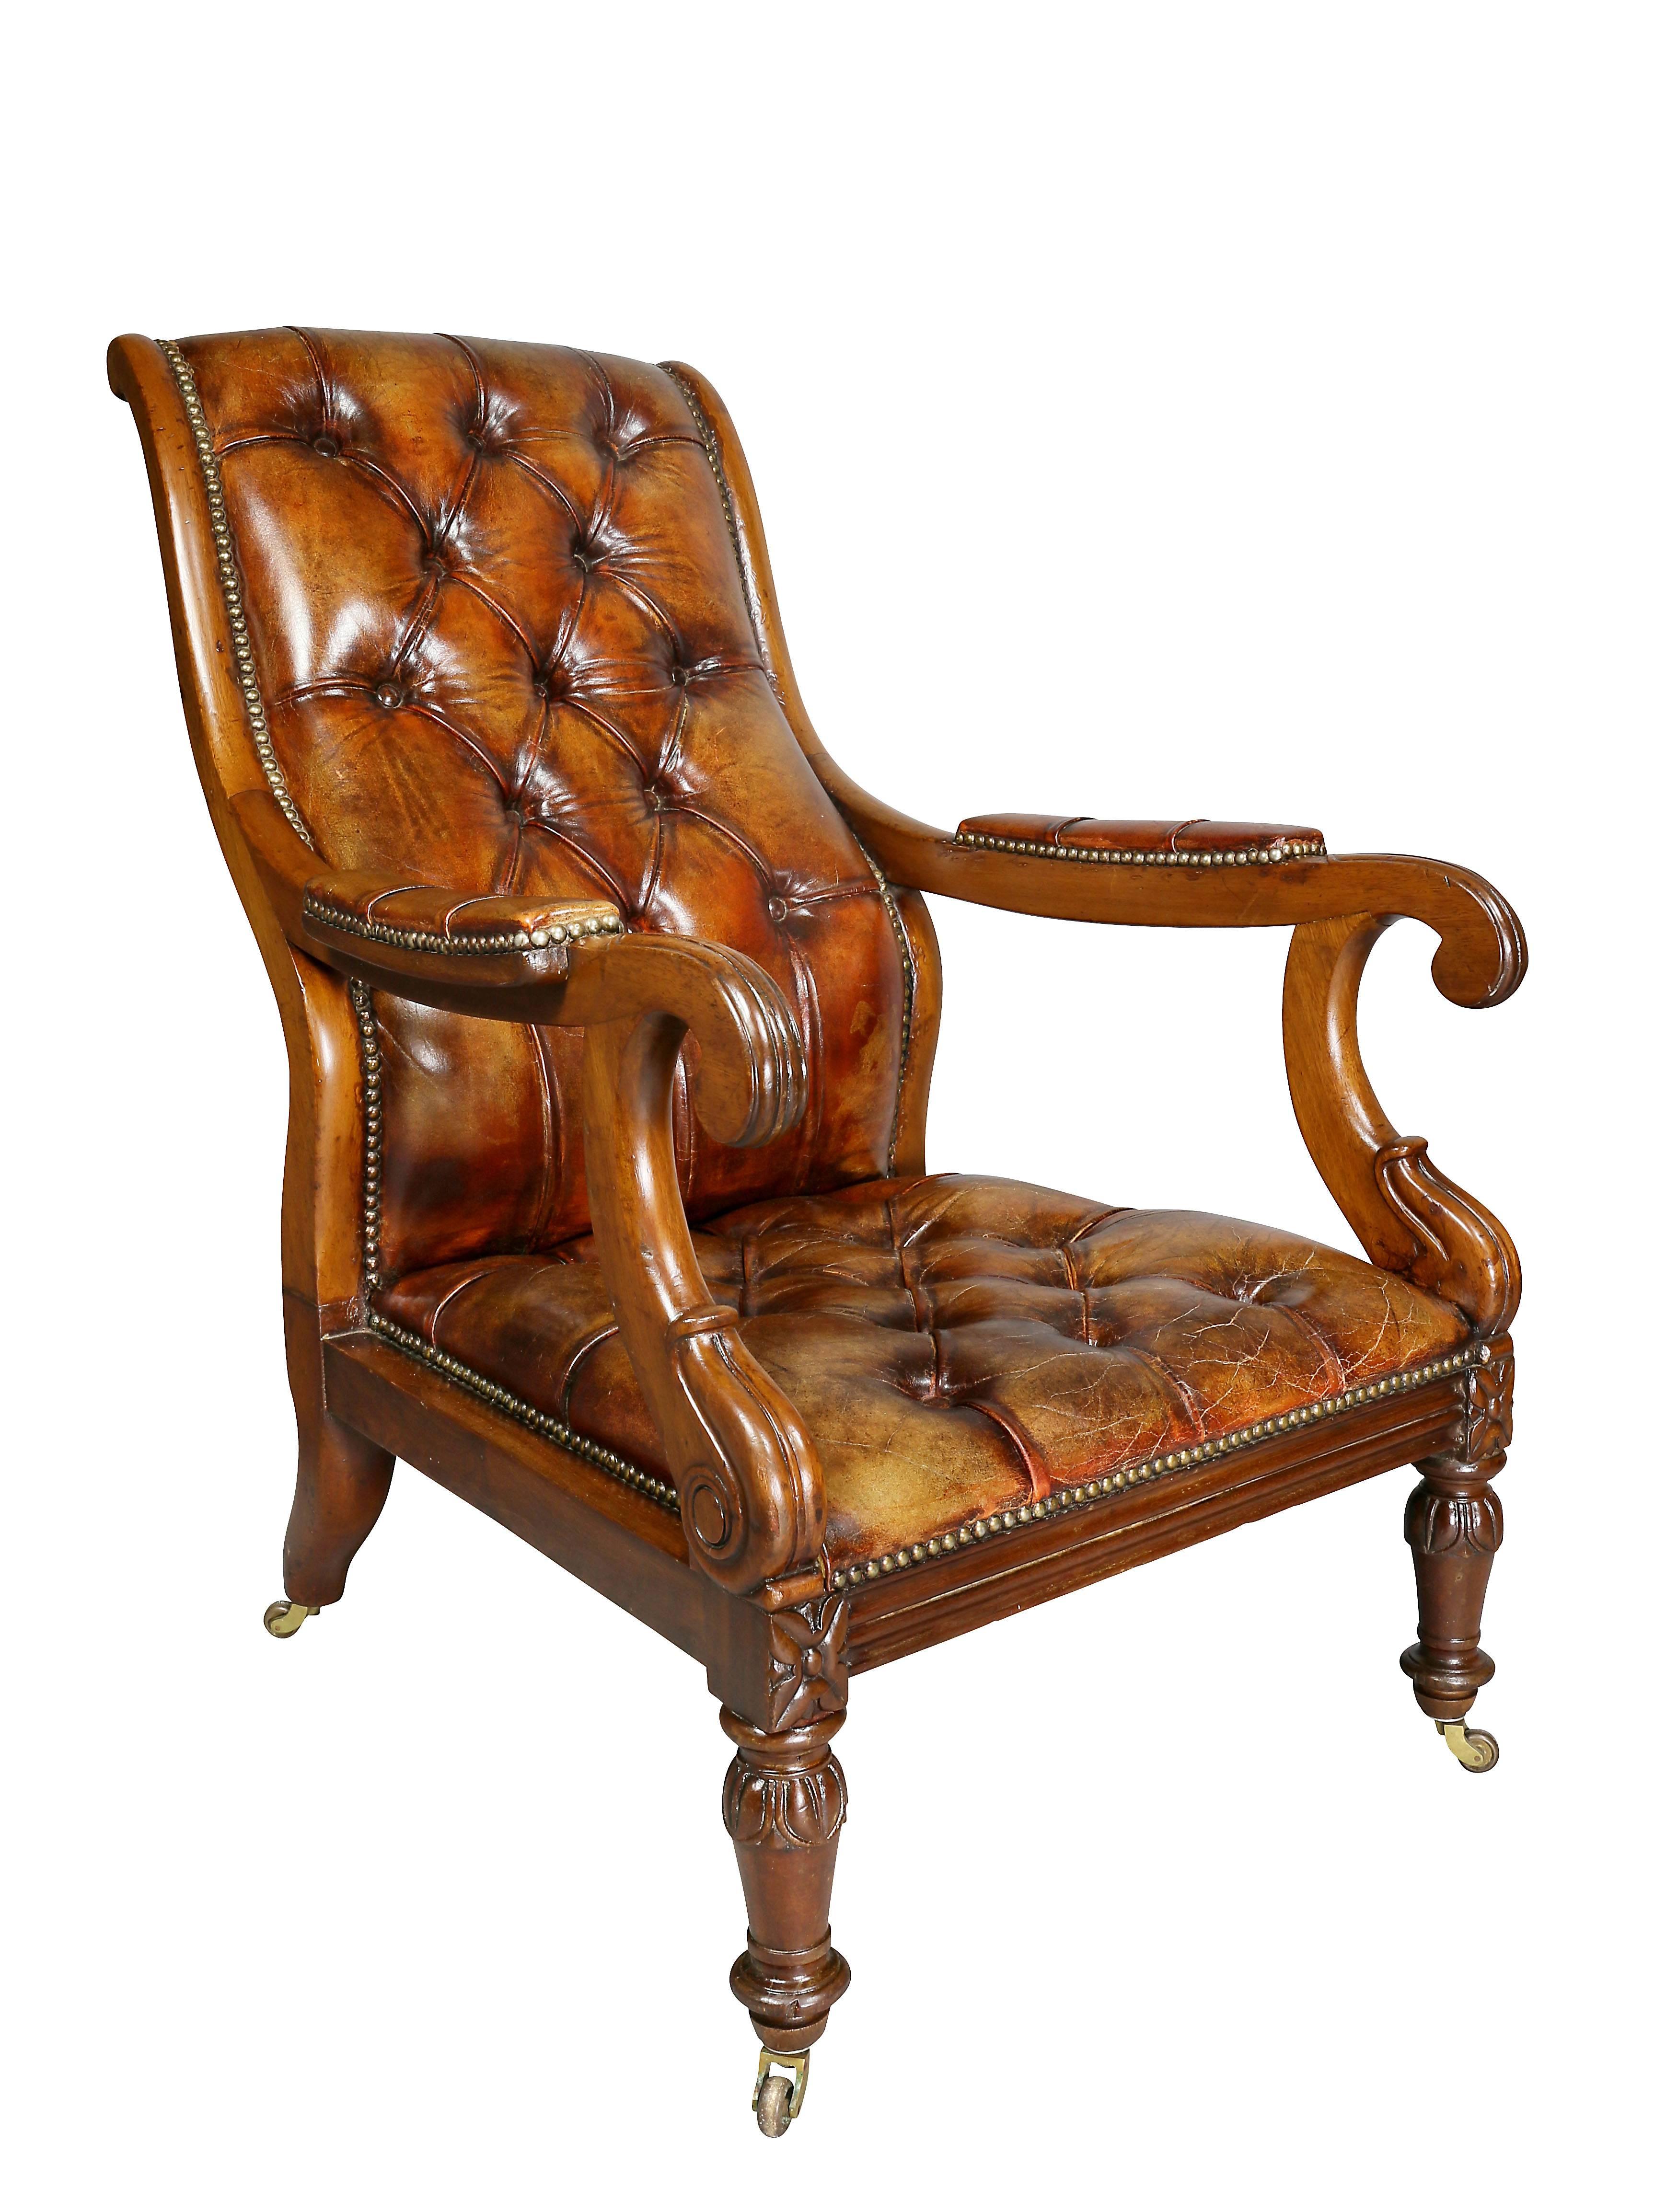 Each with curved tufted brown leather backs and scrolled arms and square conforming seats raised on circular tapered legs carved with leaf tips ending on casters. These chairs are featured in the movie Knives Out.